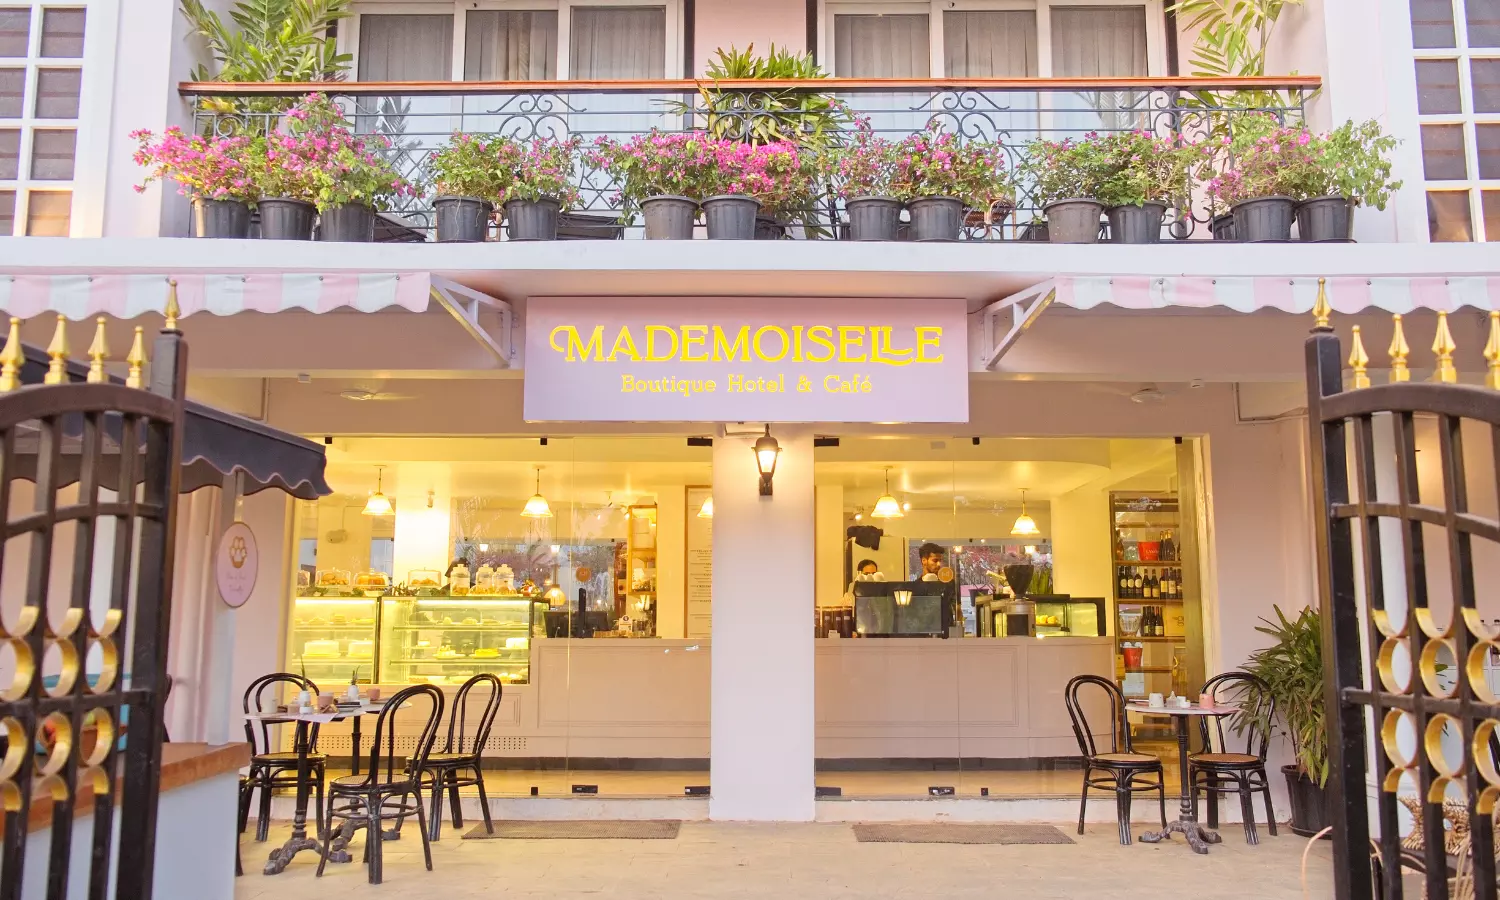 Experience French amour ala Goa with Mademoiselle Boutique Hotel and Café